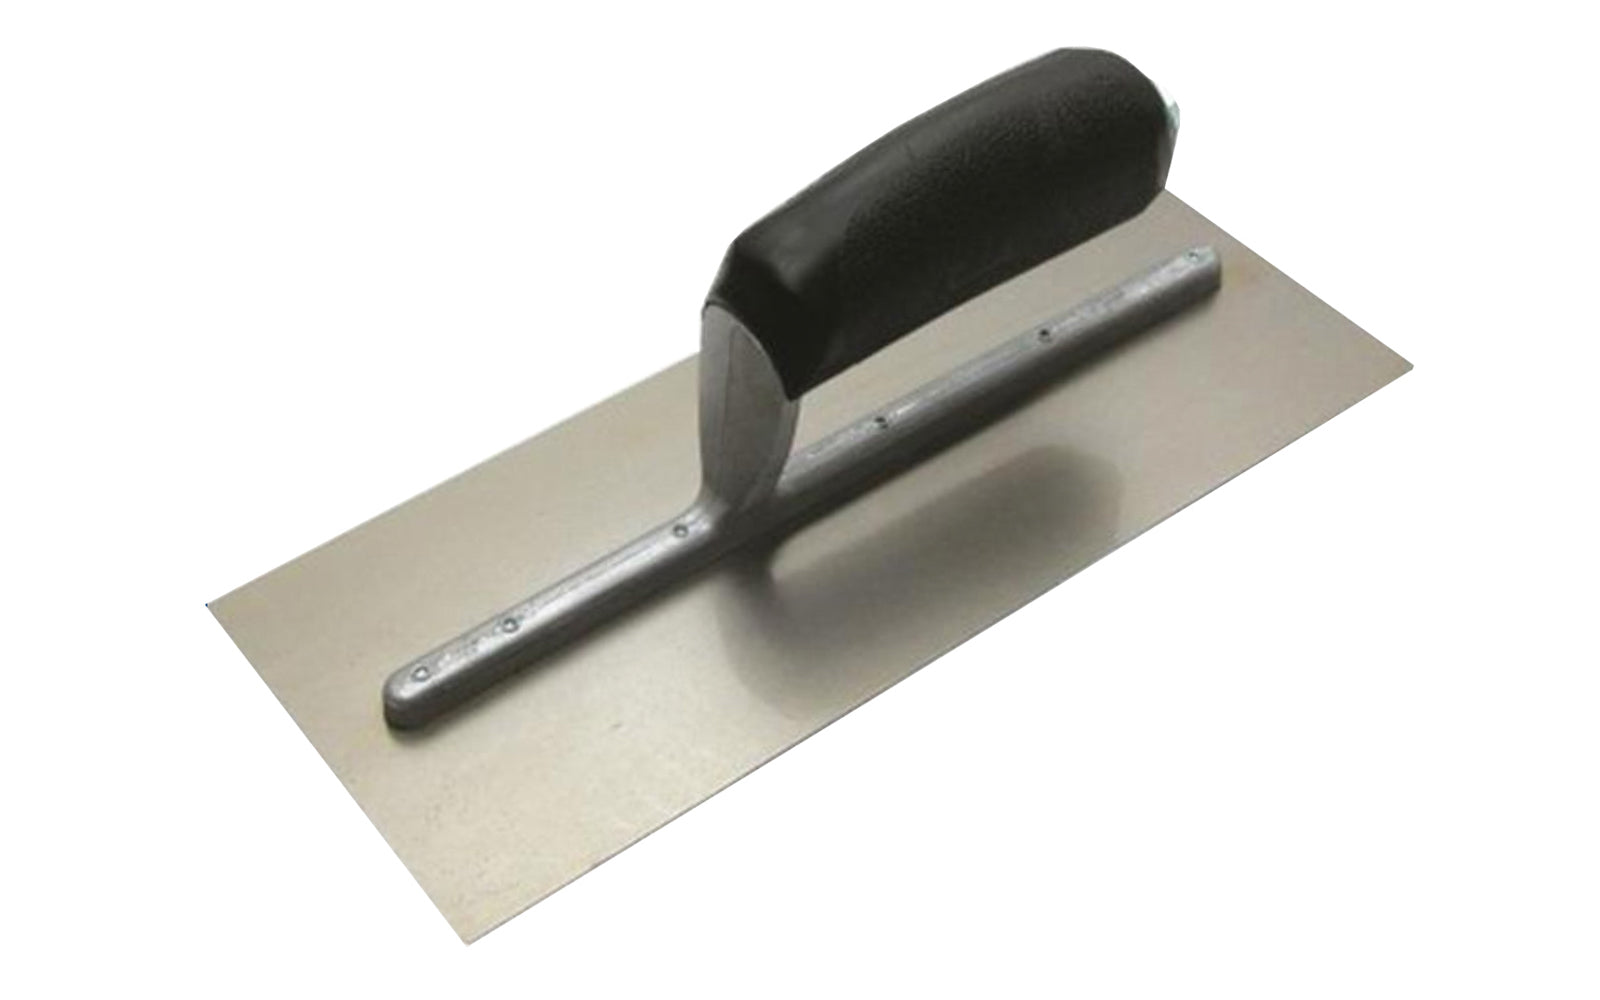 Marshalltown contractor-grade QLT Carbon Steel Finishing Drywall Trowel has an aluminum mounting that is securely riveted to a carbon steel blade. Model 912 ~ 035965026222